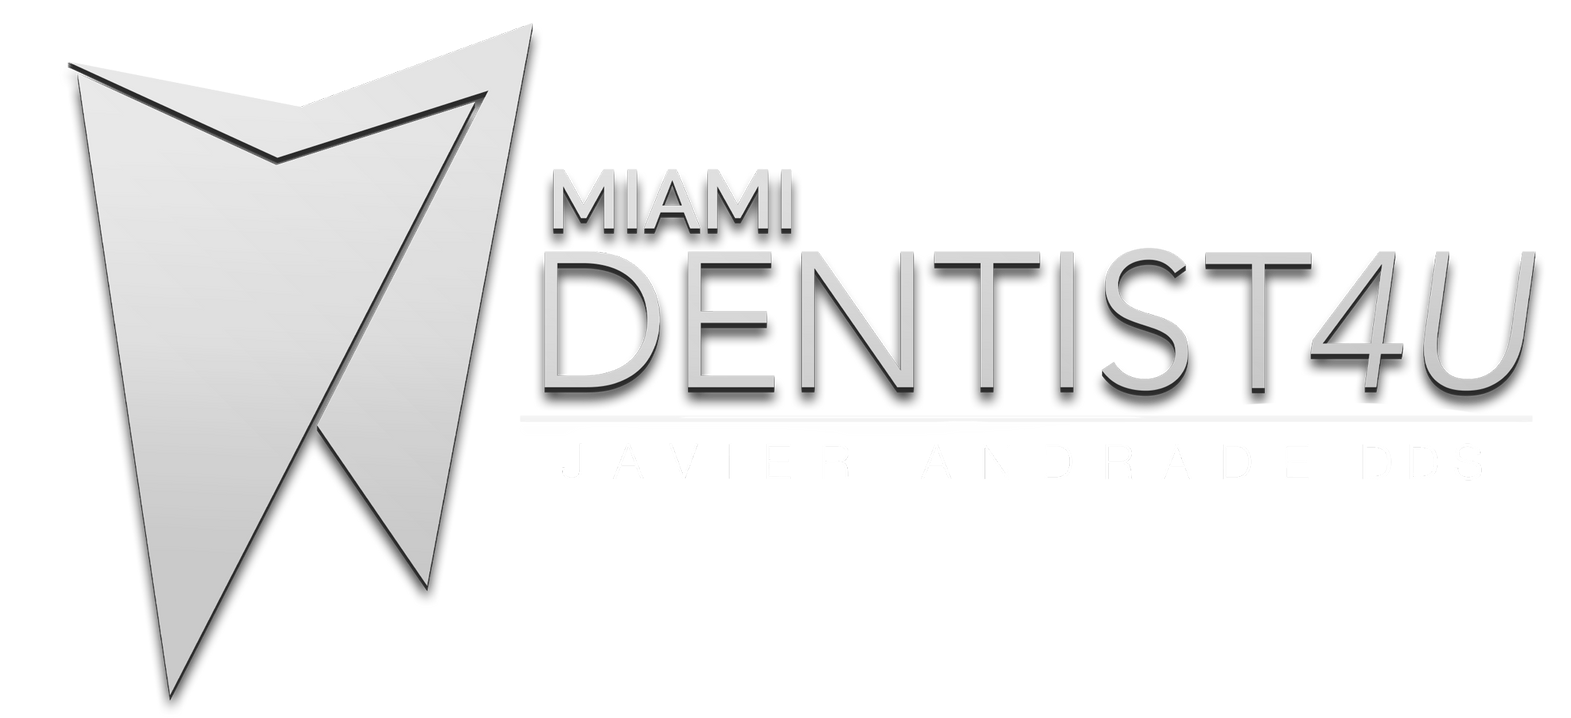 A logo for miami dentist4u with a tooth on it